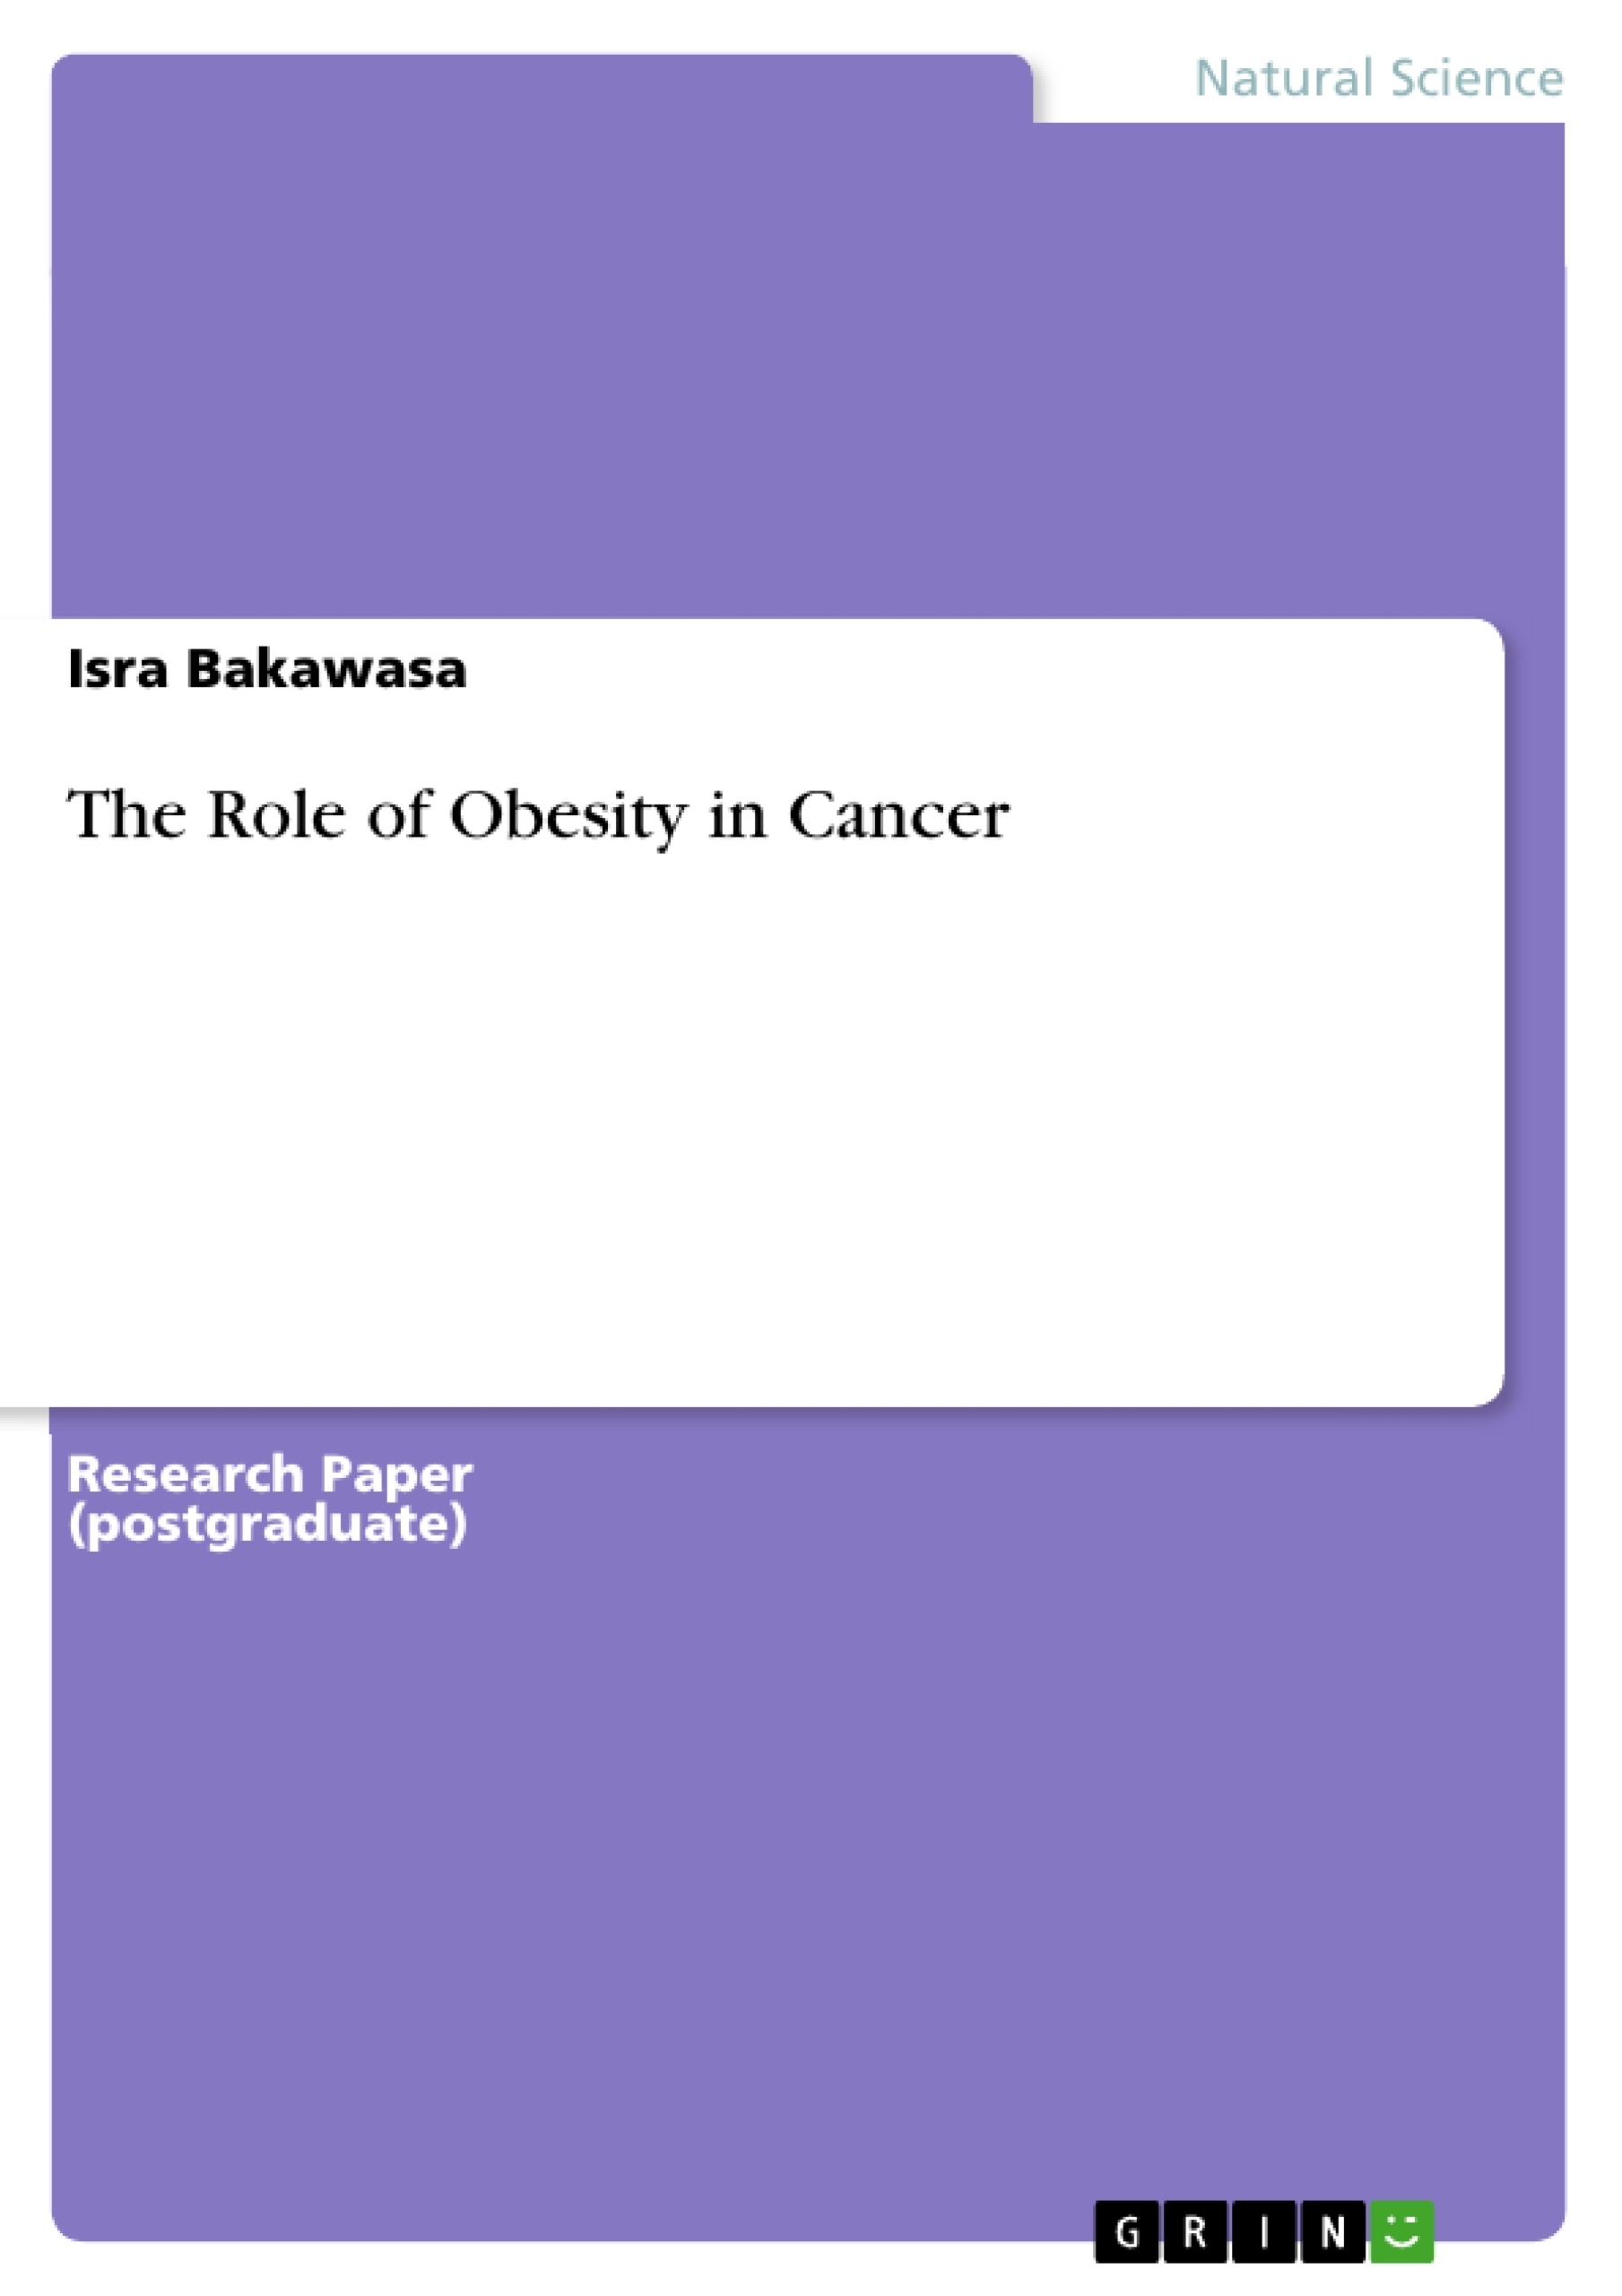 Title: The Role of Obesity in Cancer